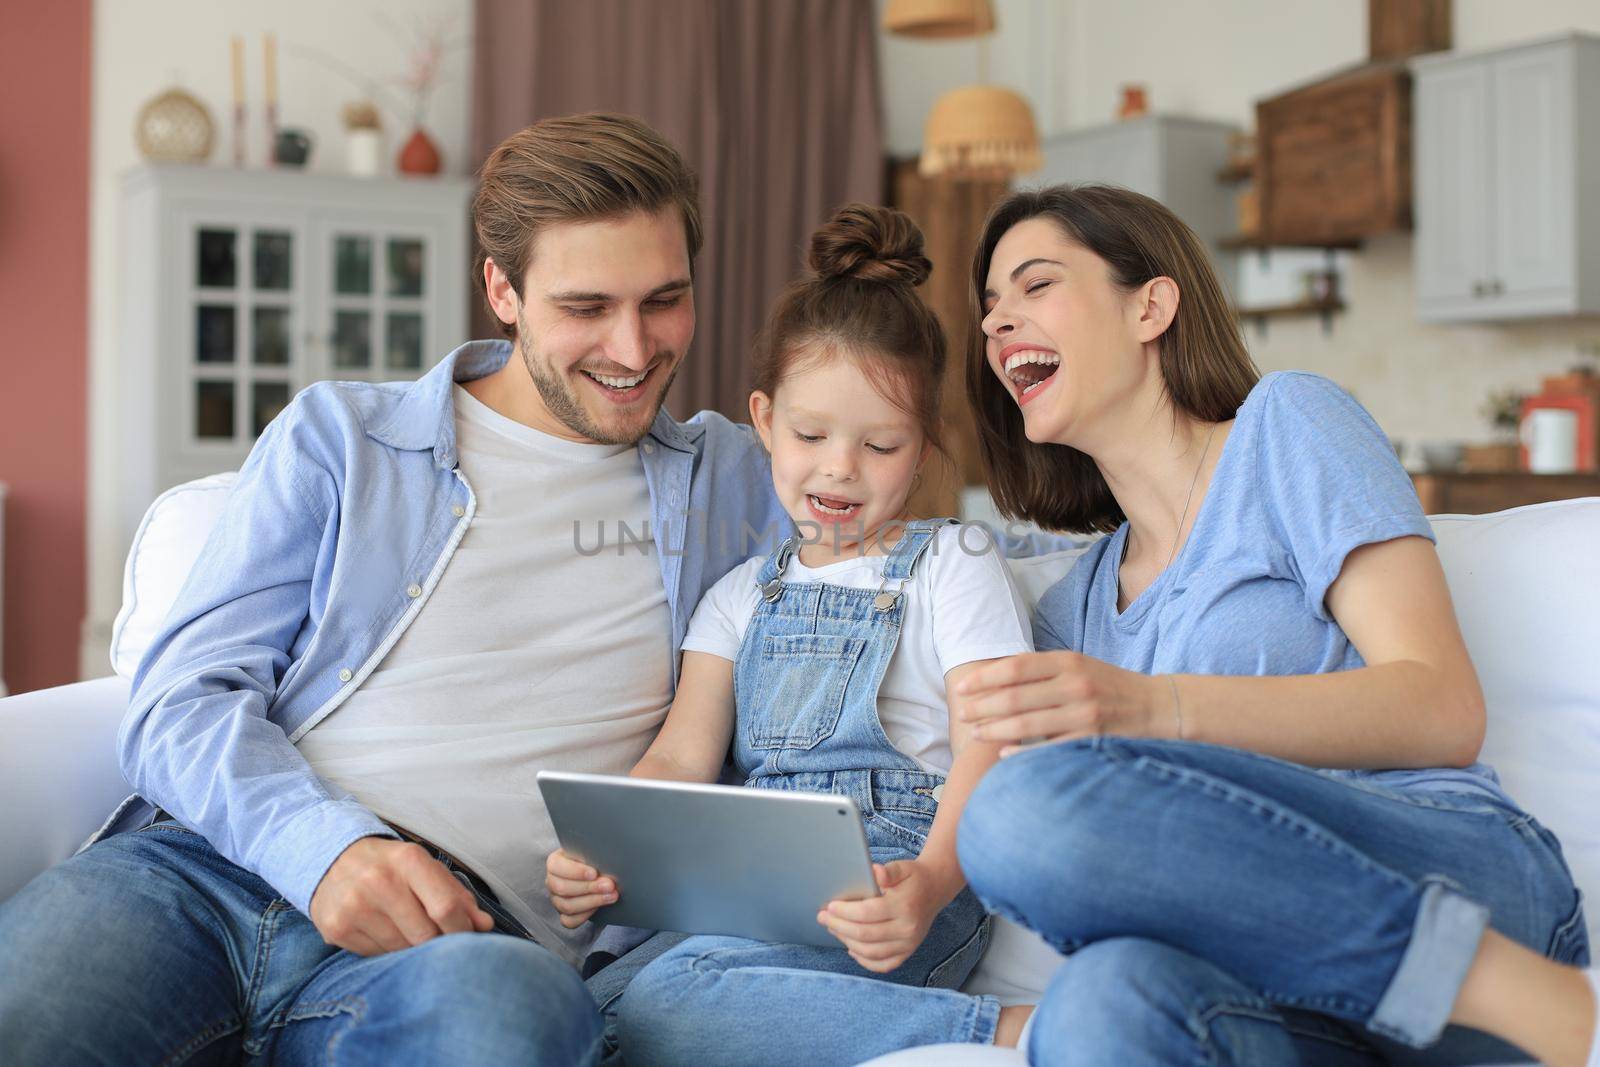 Positive friendly young parents with smiling little daughter sitting on sofa together answering video call on digital tablet while relaxing at home on weekend